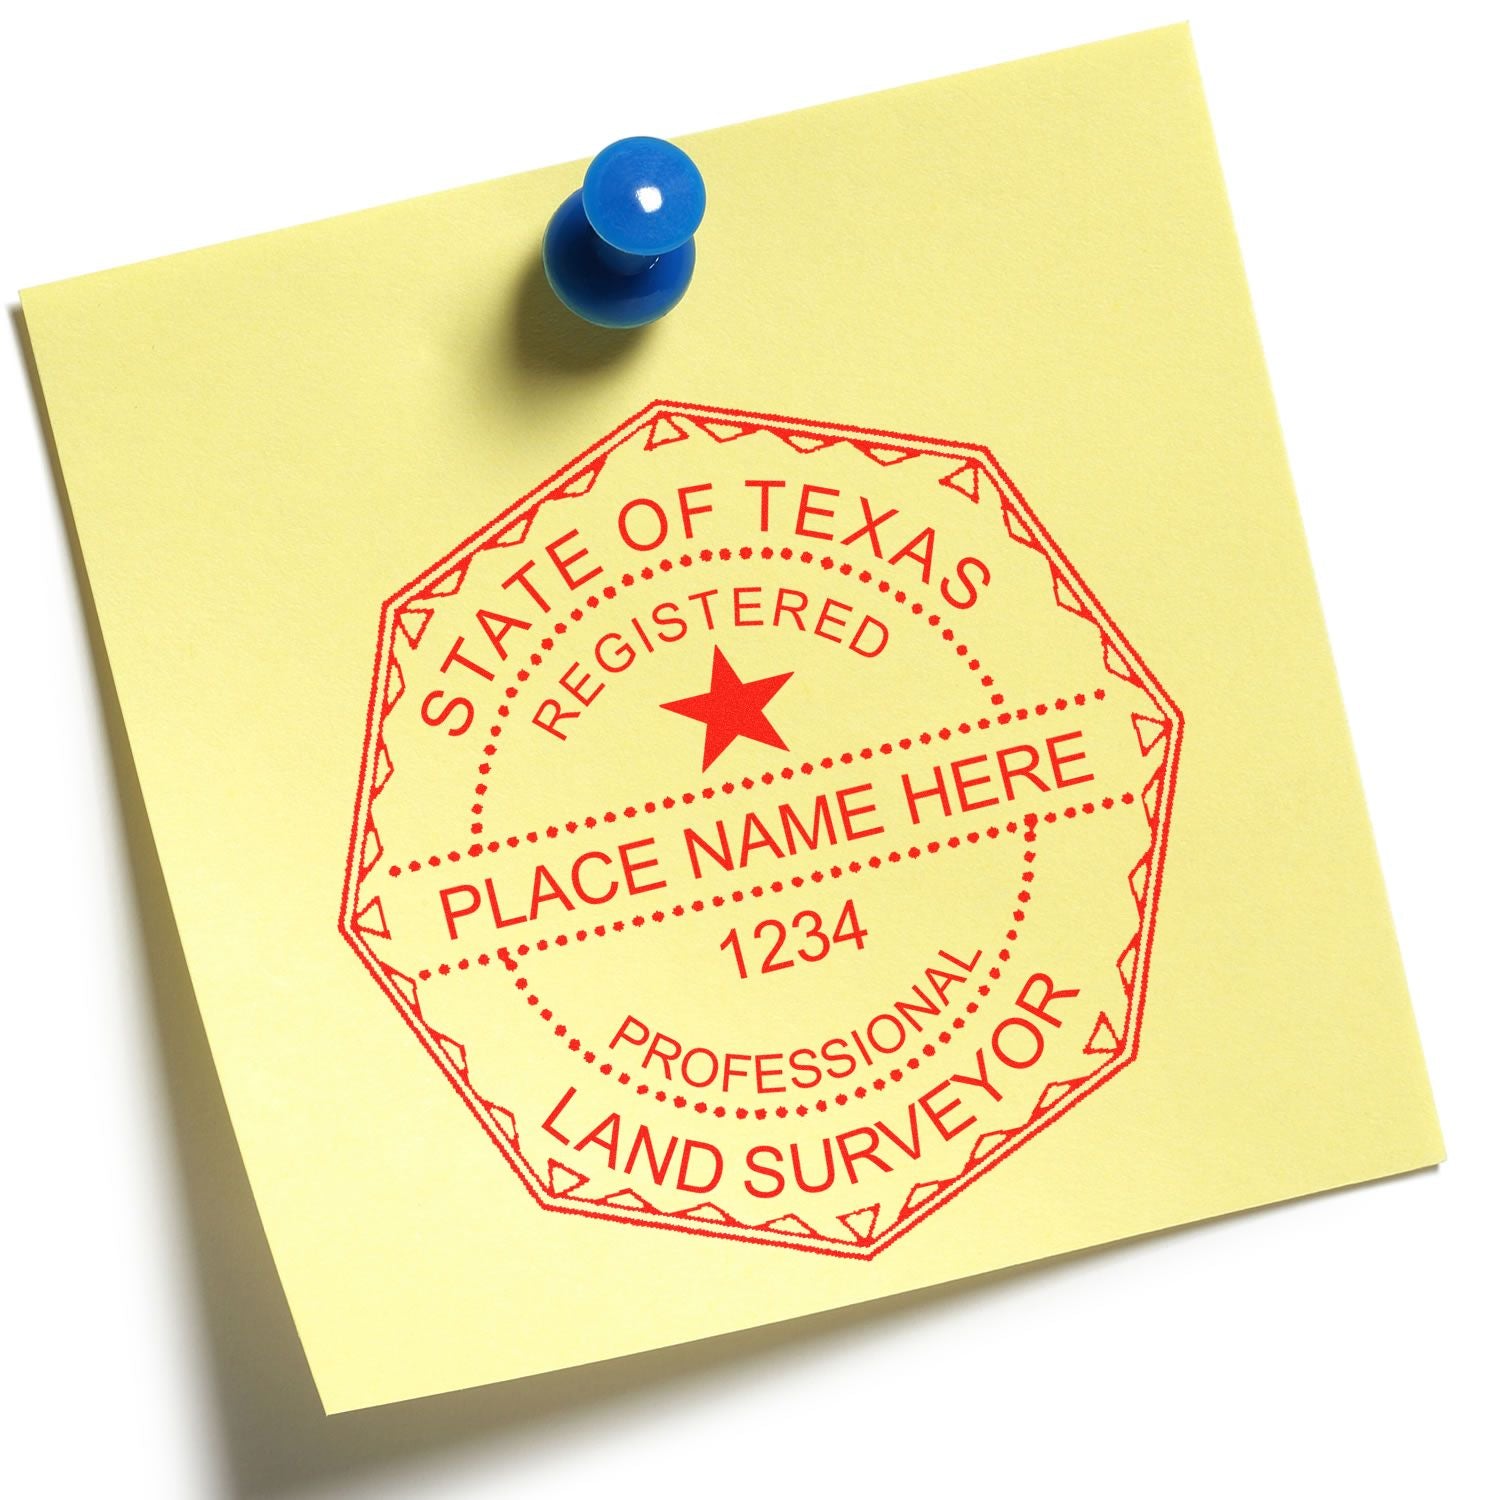 Demonstrate Your Expertise: The Power of the Texas Professional Land Surveyor Seal Feature Image